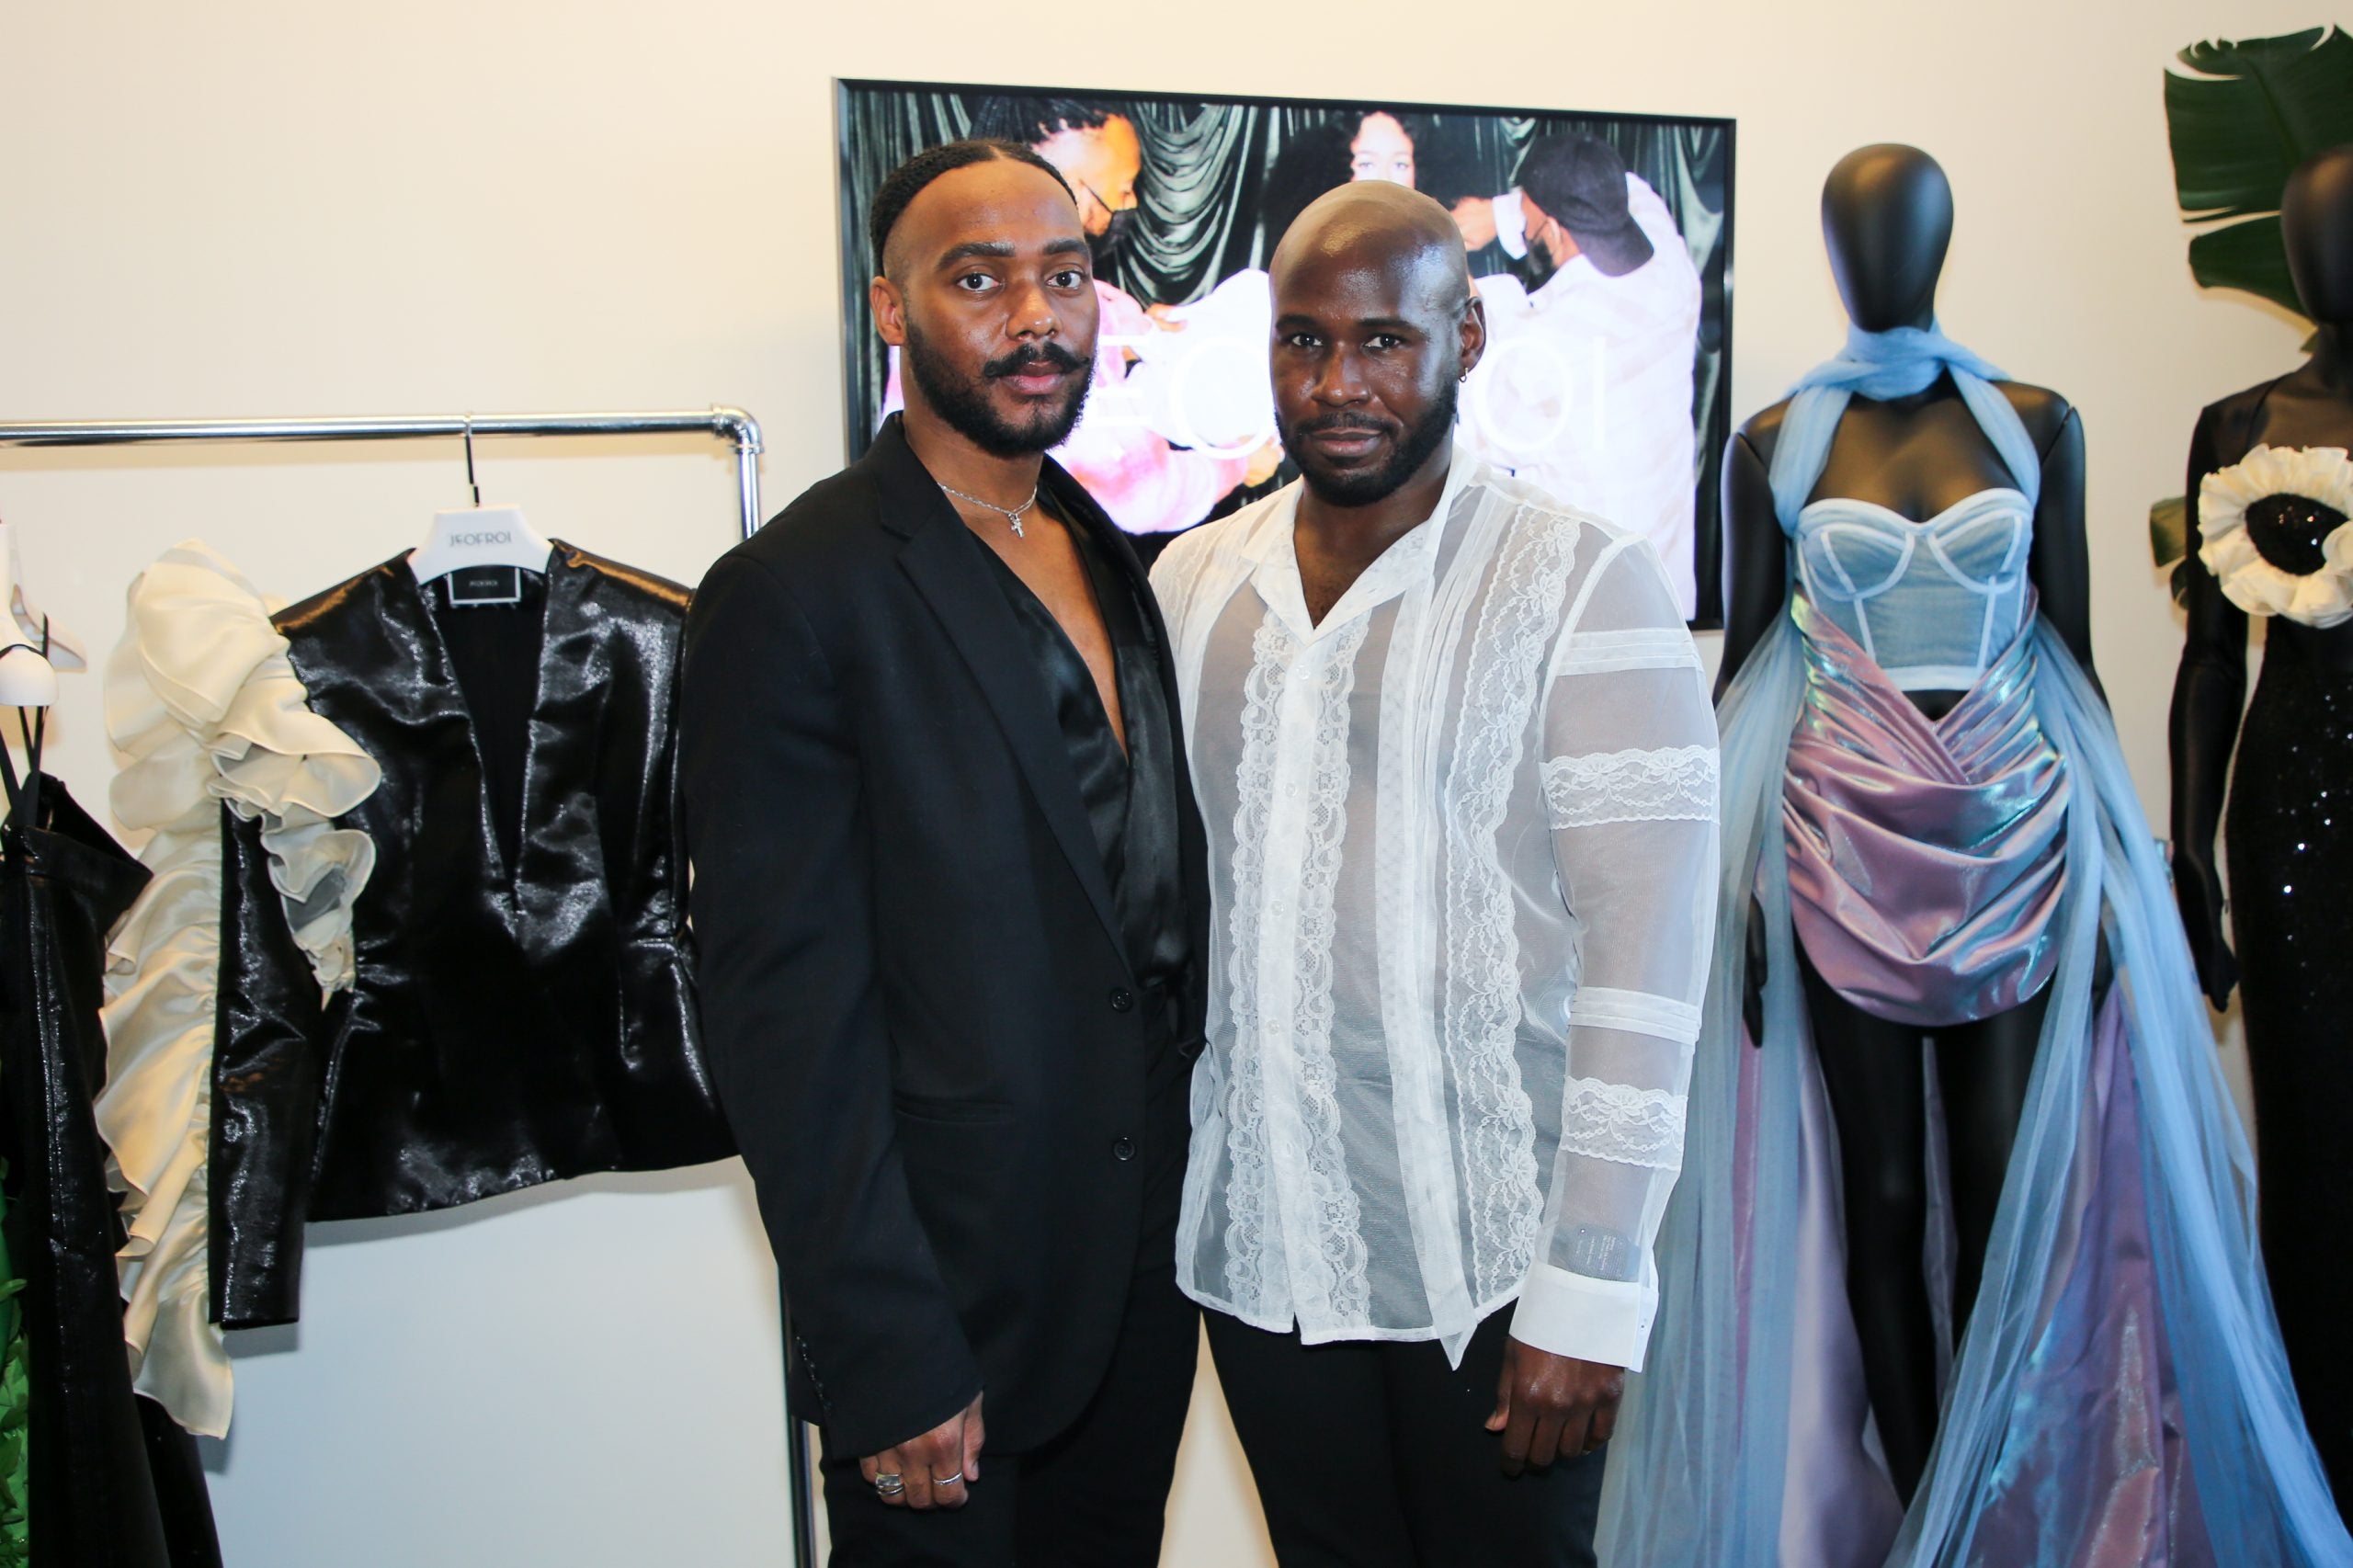 Black In Fashion Council’s Showroom Puts A Spotlight On Emerging Black Designers